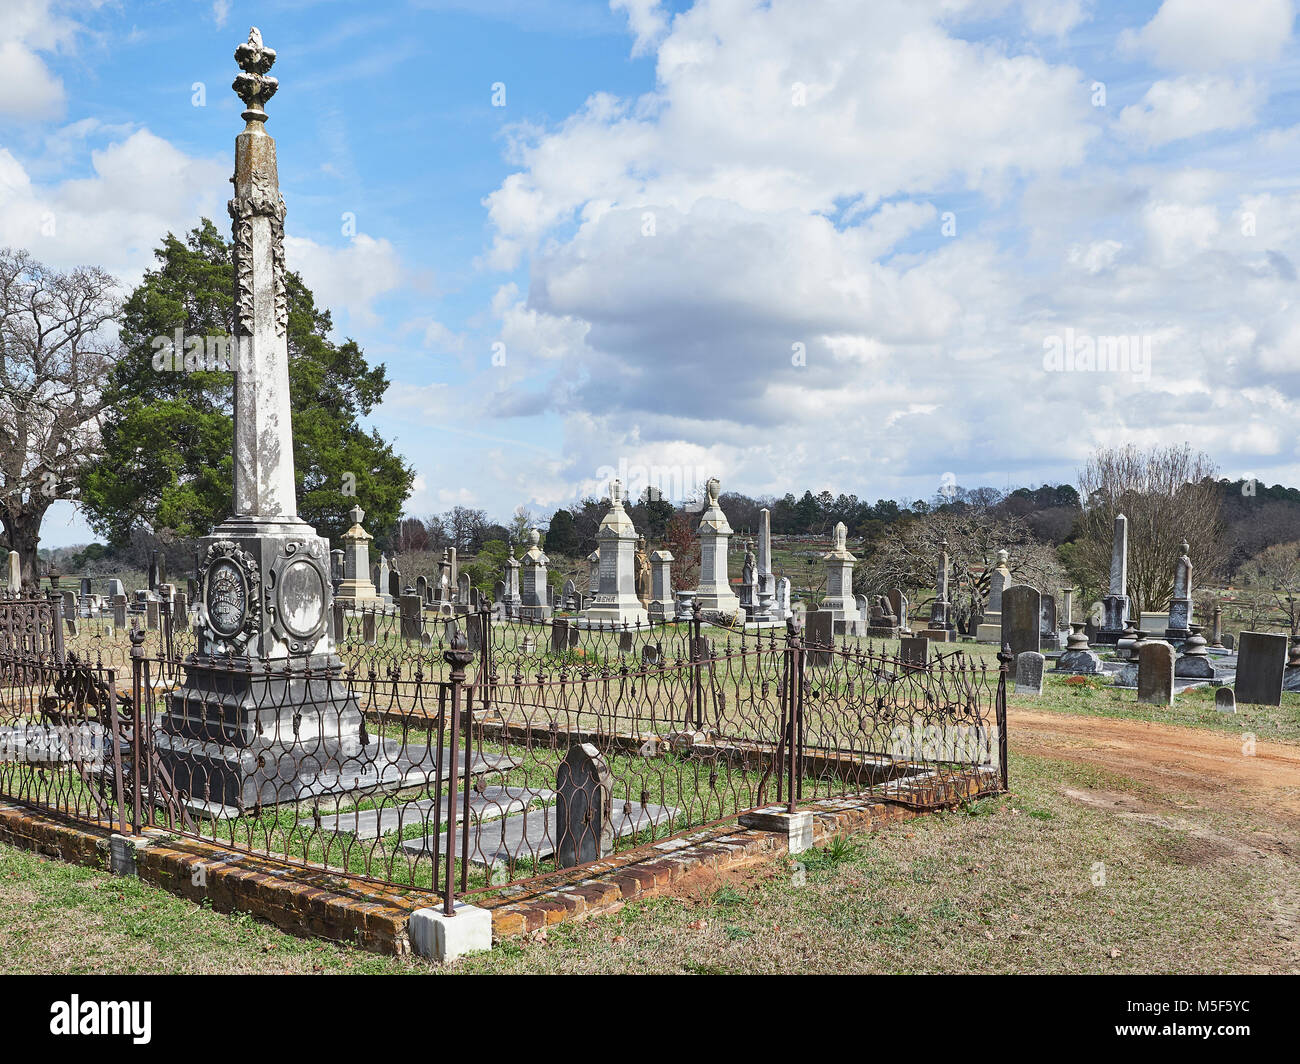 Old Oakwood Cemetery with headstones, gravestones and monuments established in the early 1800's for all faiths in Montgomery, Alabama USA. Stock Photo